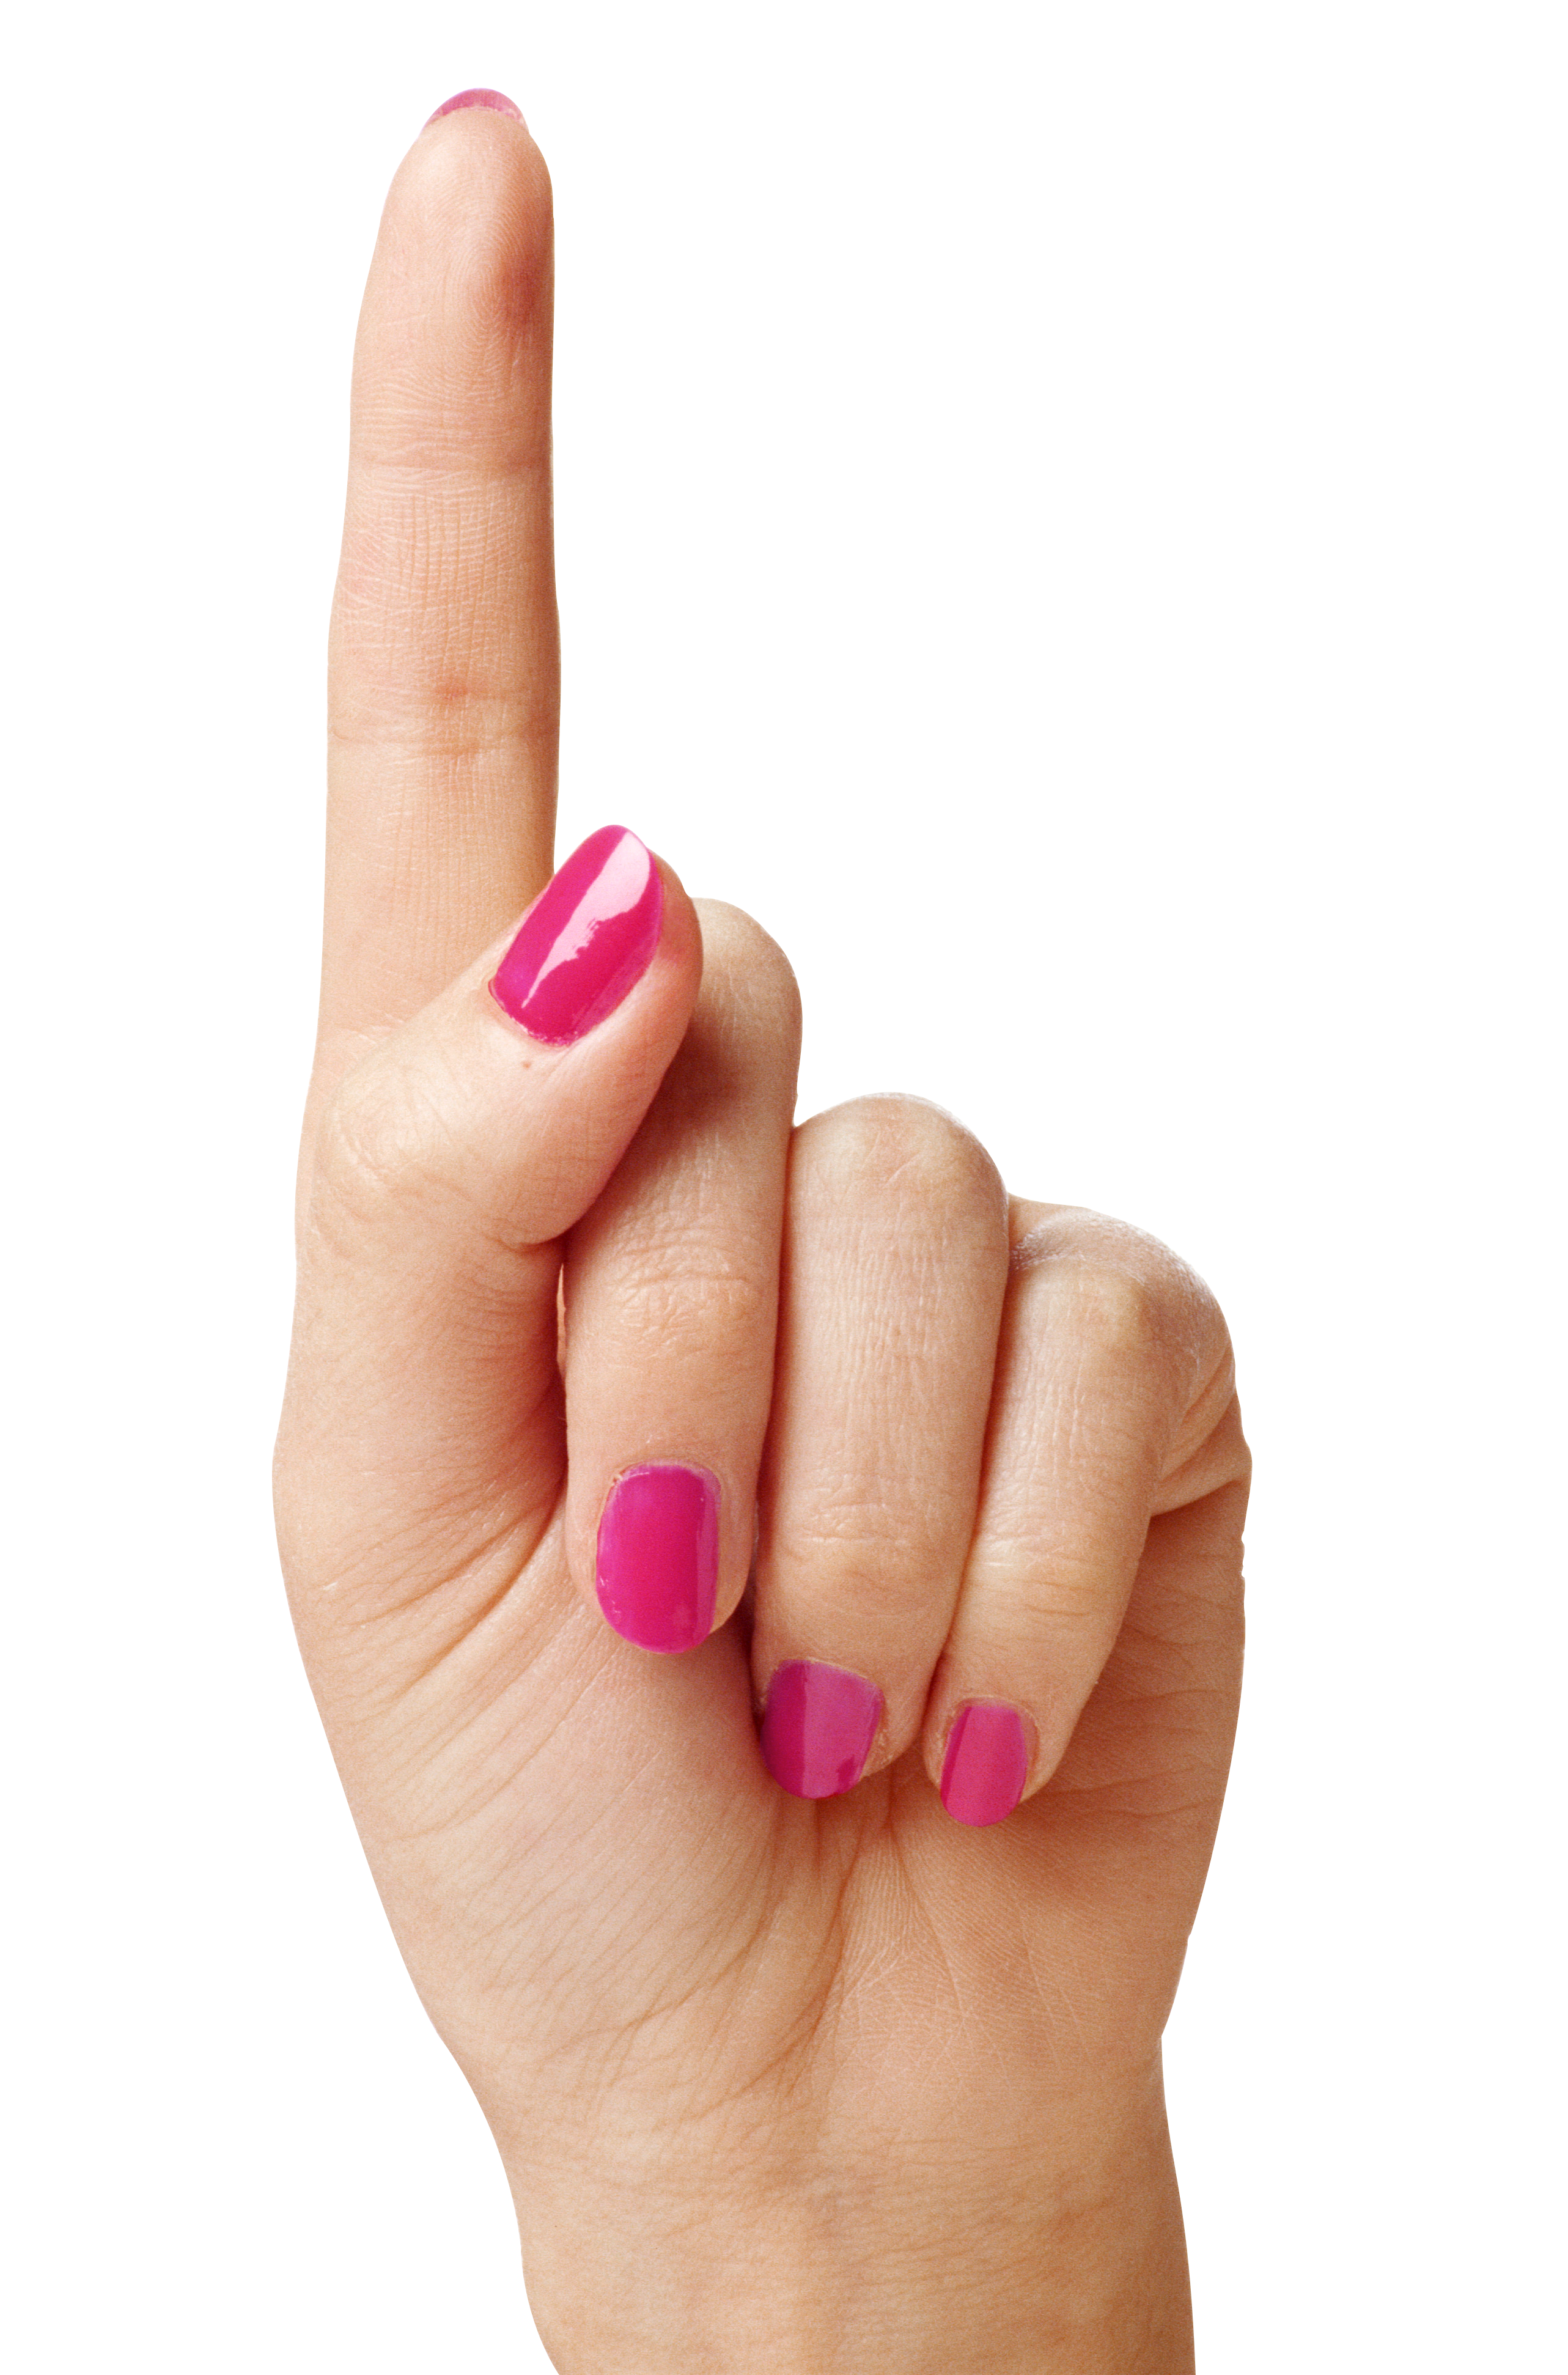 Showing one fingers png. Finger clipart nice hand